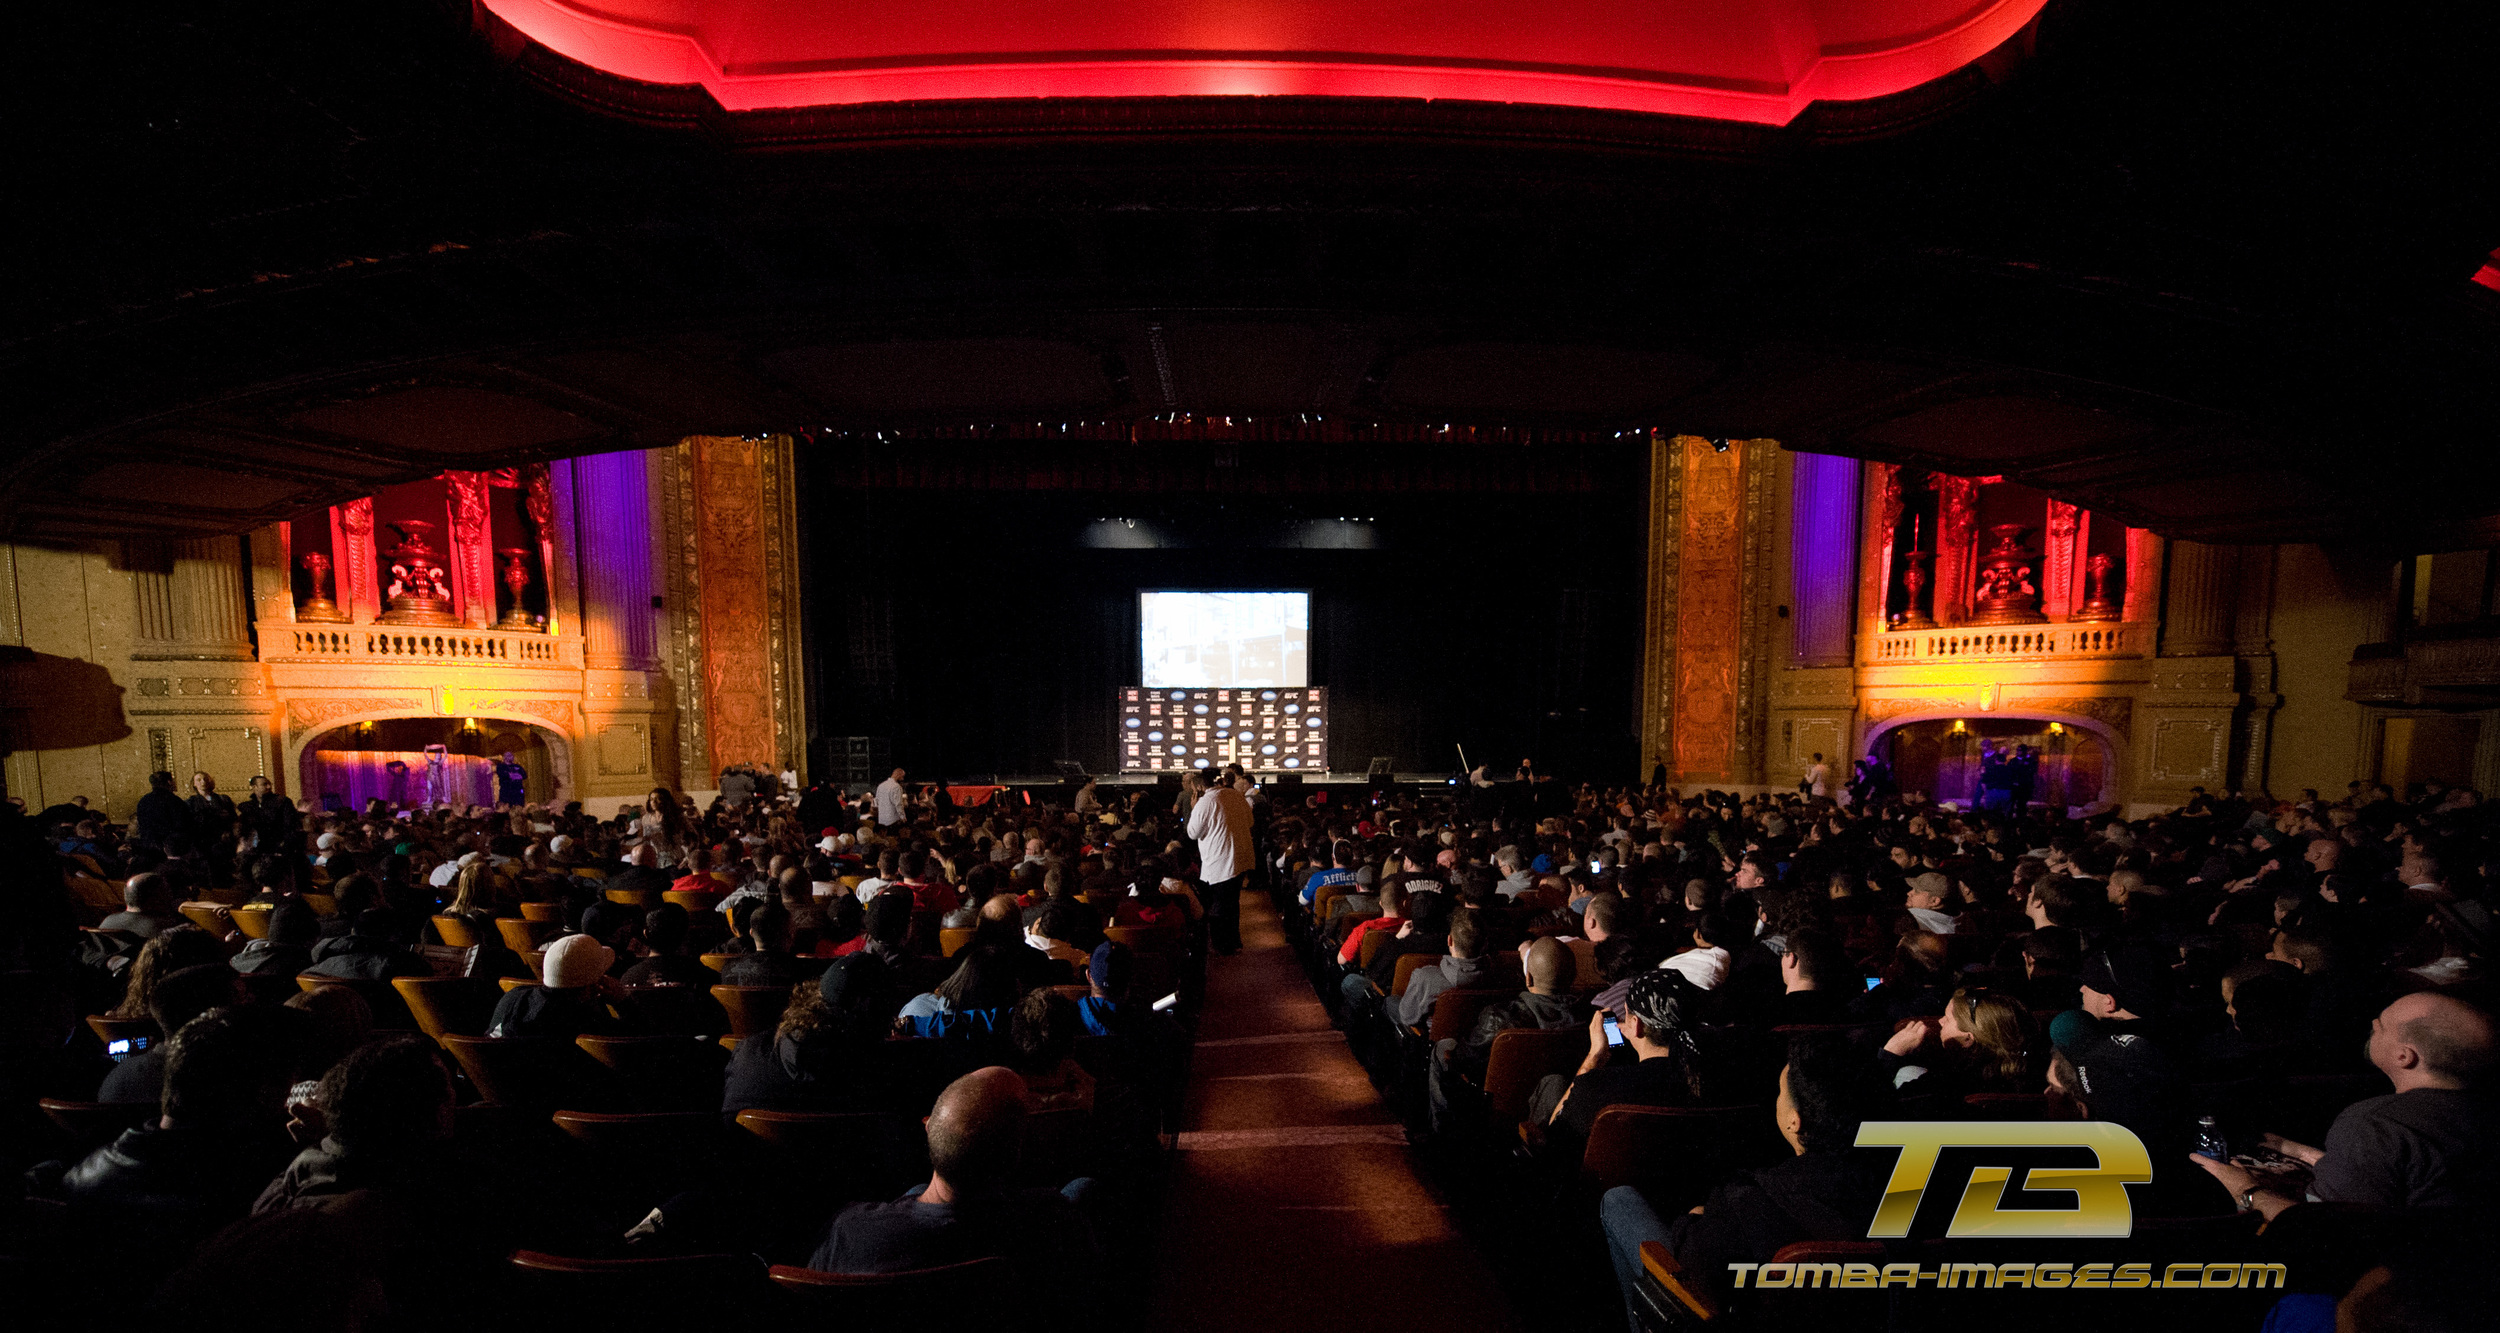 UFC Weight-In's at the Chicago Theater 